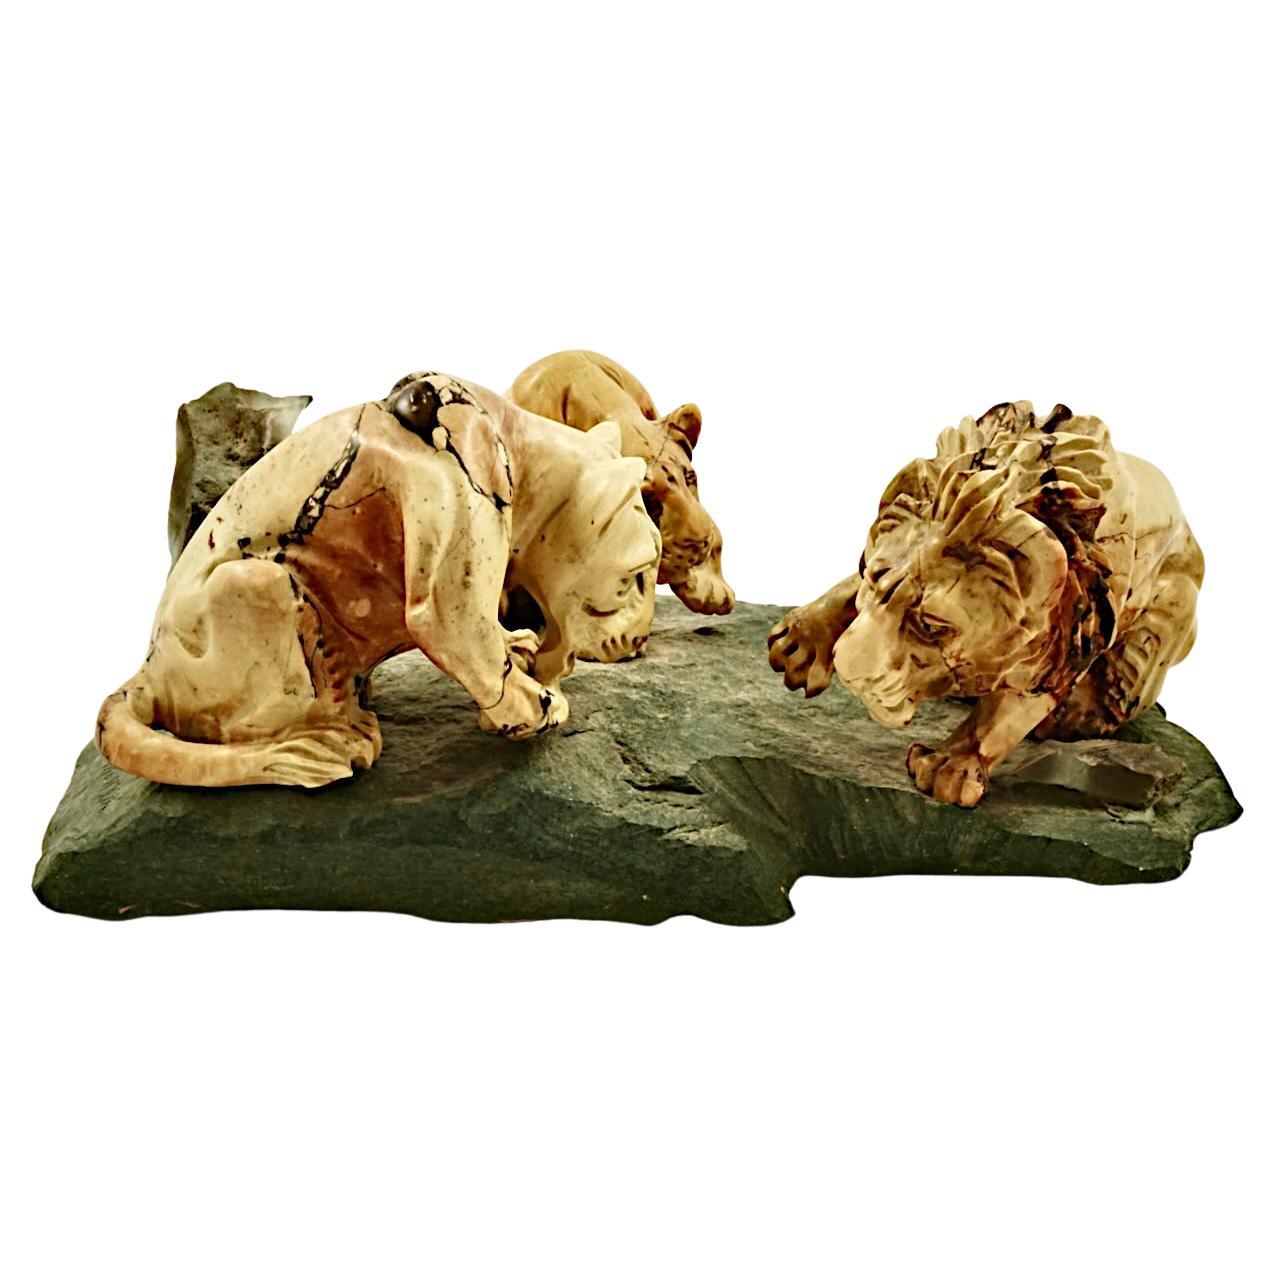 Heavy carved stone sculpture of a family of African lions. This unusual sculpture is in very good condition, the male lion is a little loose on the base. Measuring approximately length 26 cm / 10.2 inches, by width approximately 14 cm / 5.5 inches.